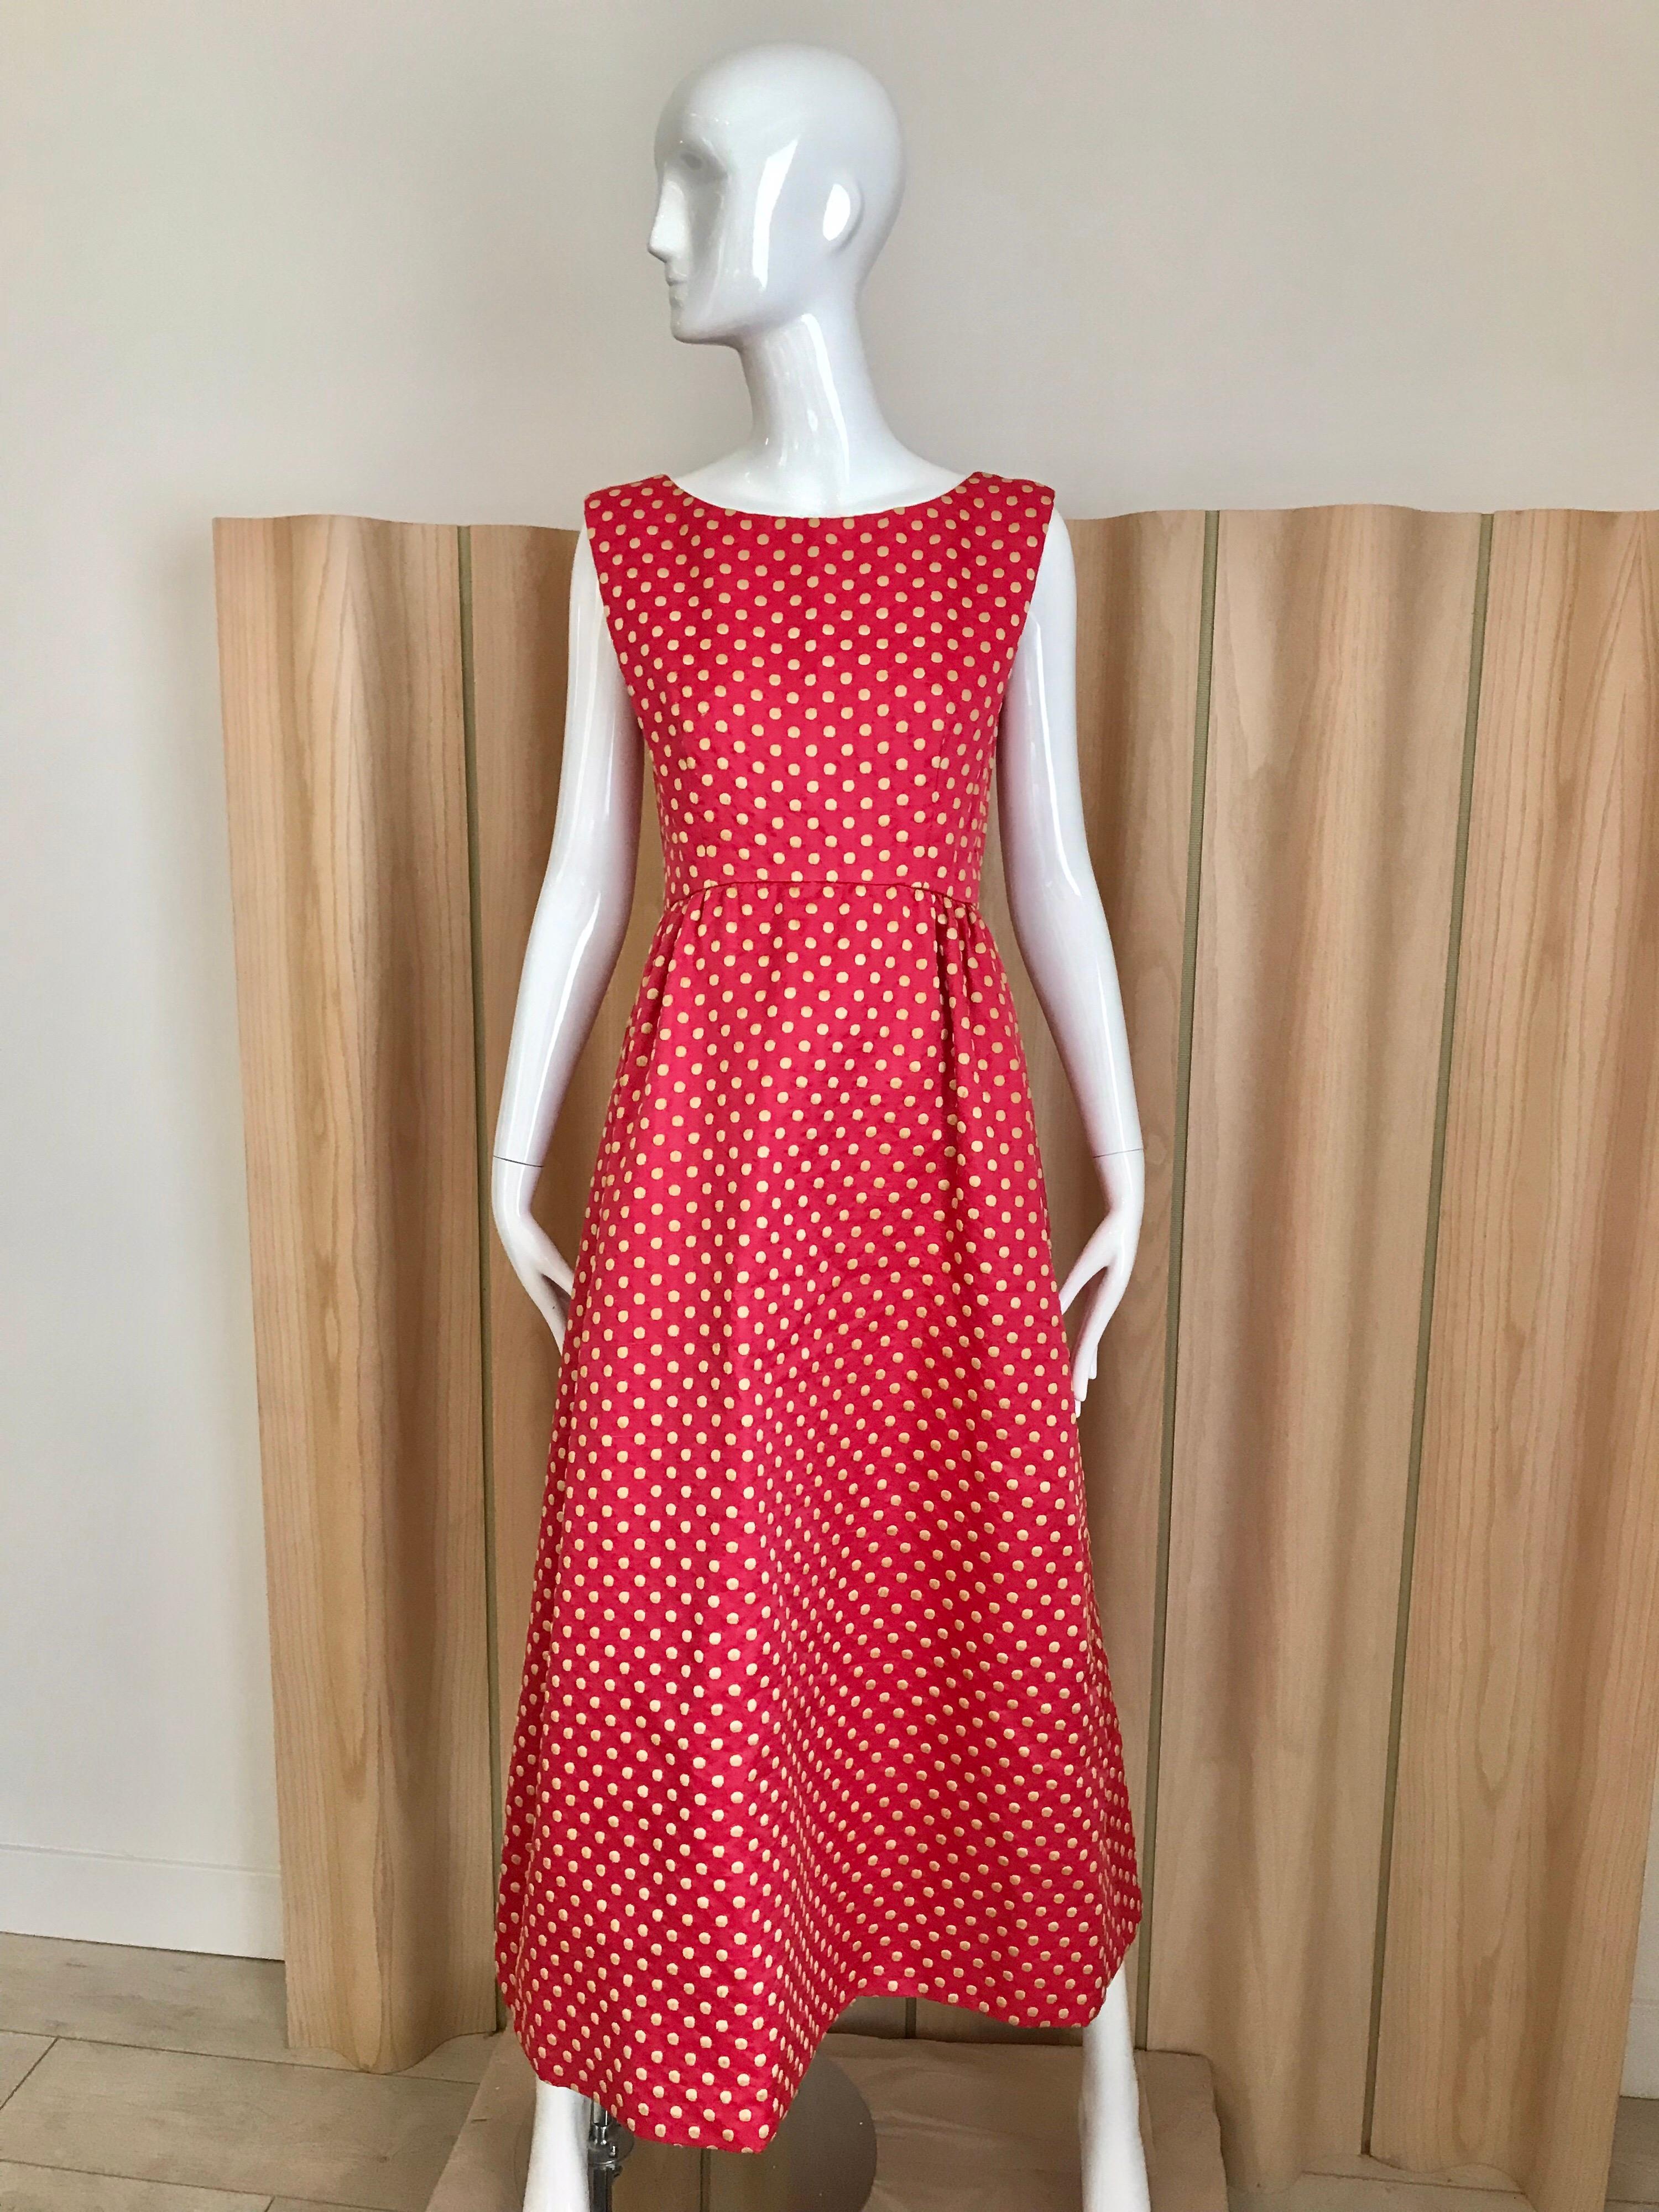 Classic Vintage Norman Norell early 60s sleeveless maxi silk dress in dark pink color with cream polka dots. Dress comes with matching  crop fitted jacket with silk Pom Pom buttons.
Measurement:
Bust: 34 inches / Waist: 28 inches/ Dress length: 50.5